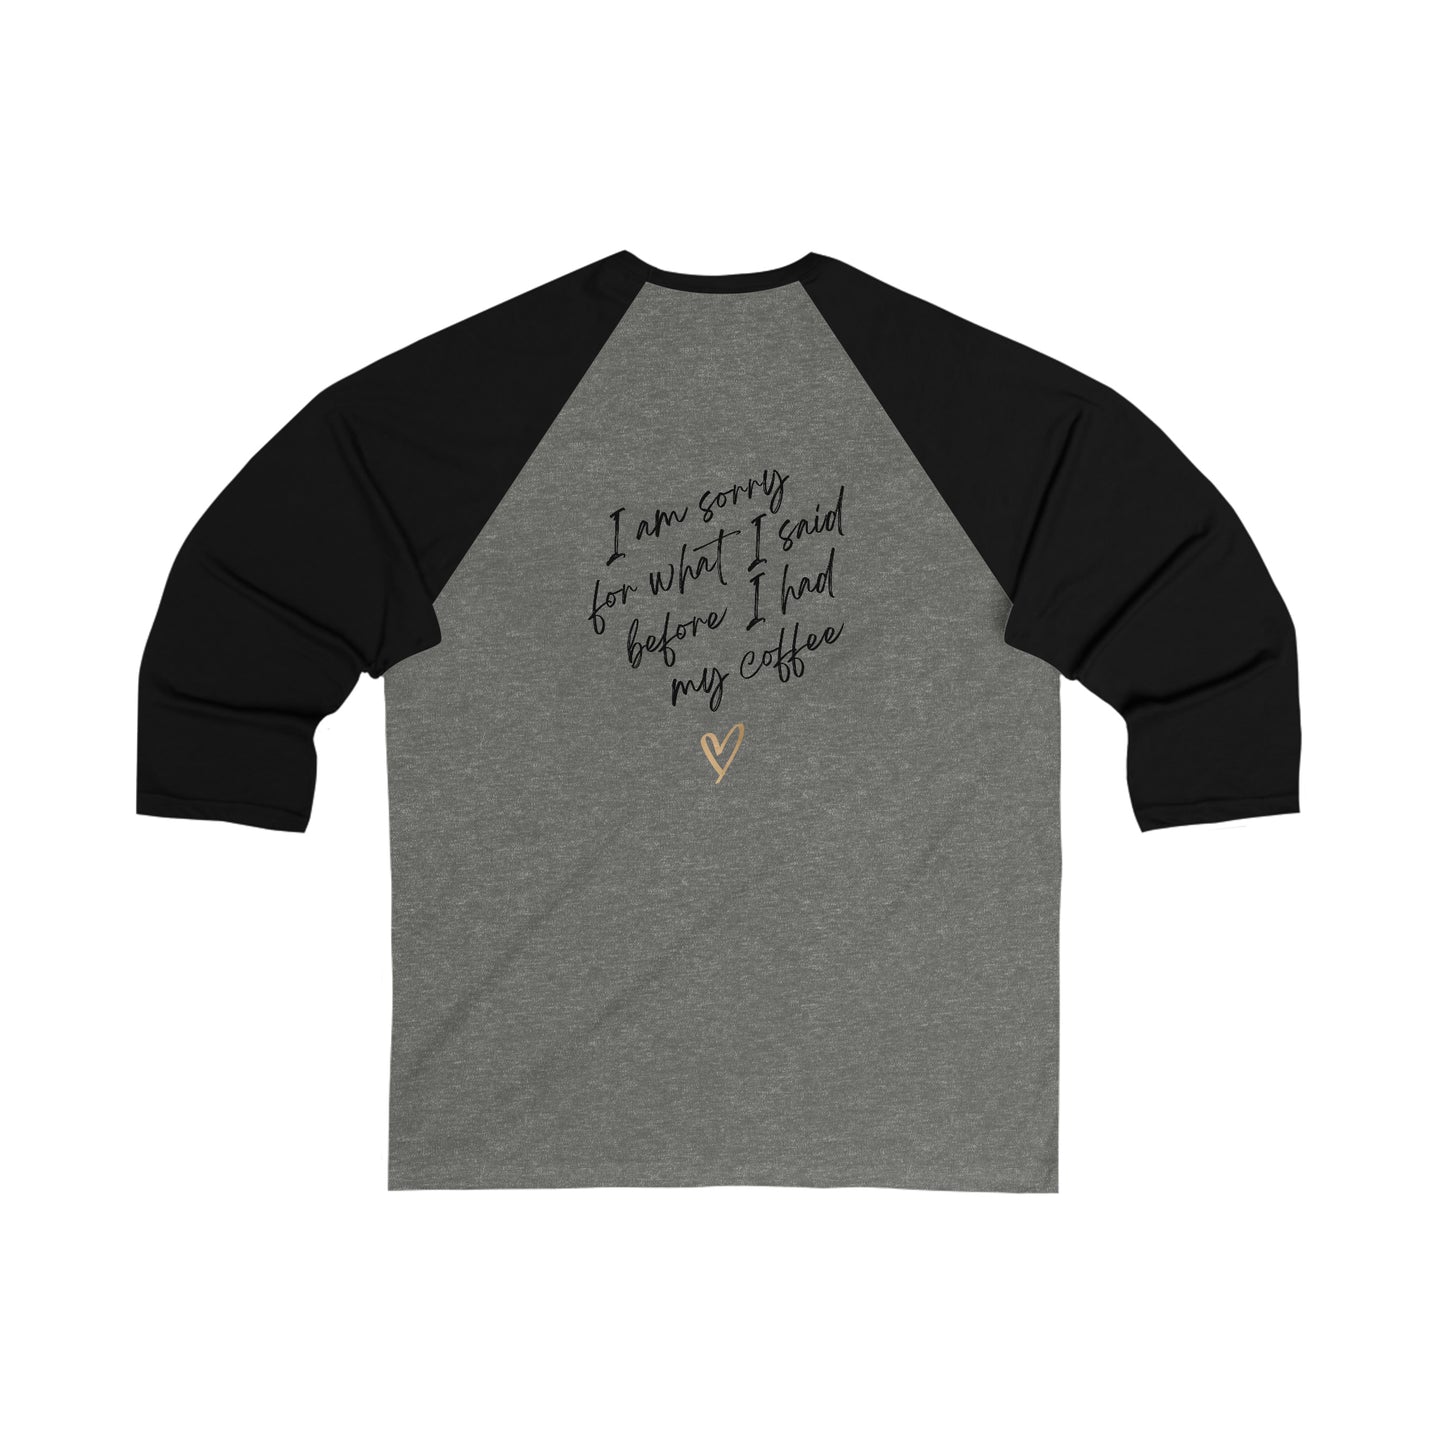 A T-shirt for Horse Riding and Coffee 3/4 Sleeve Baseball Tee